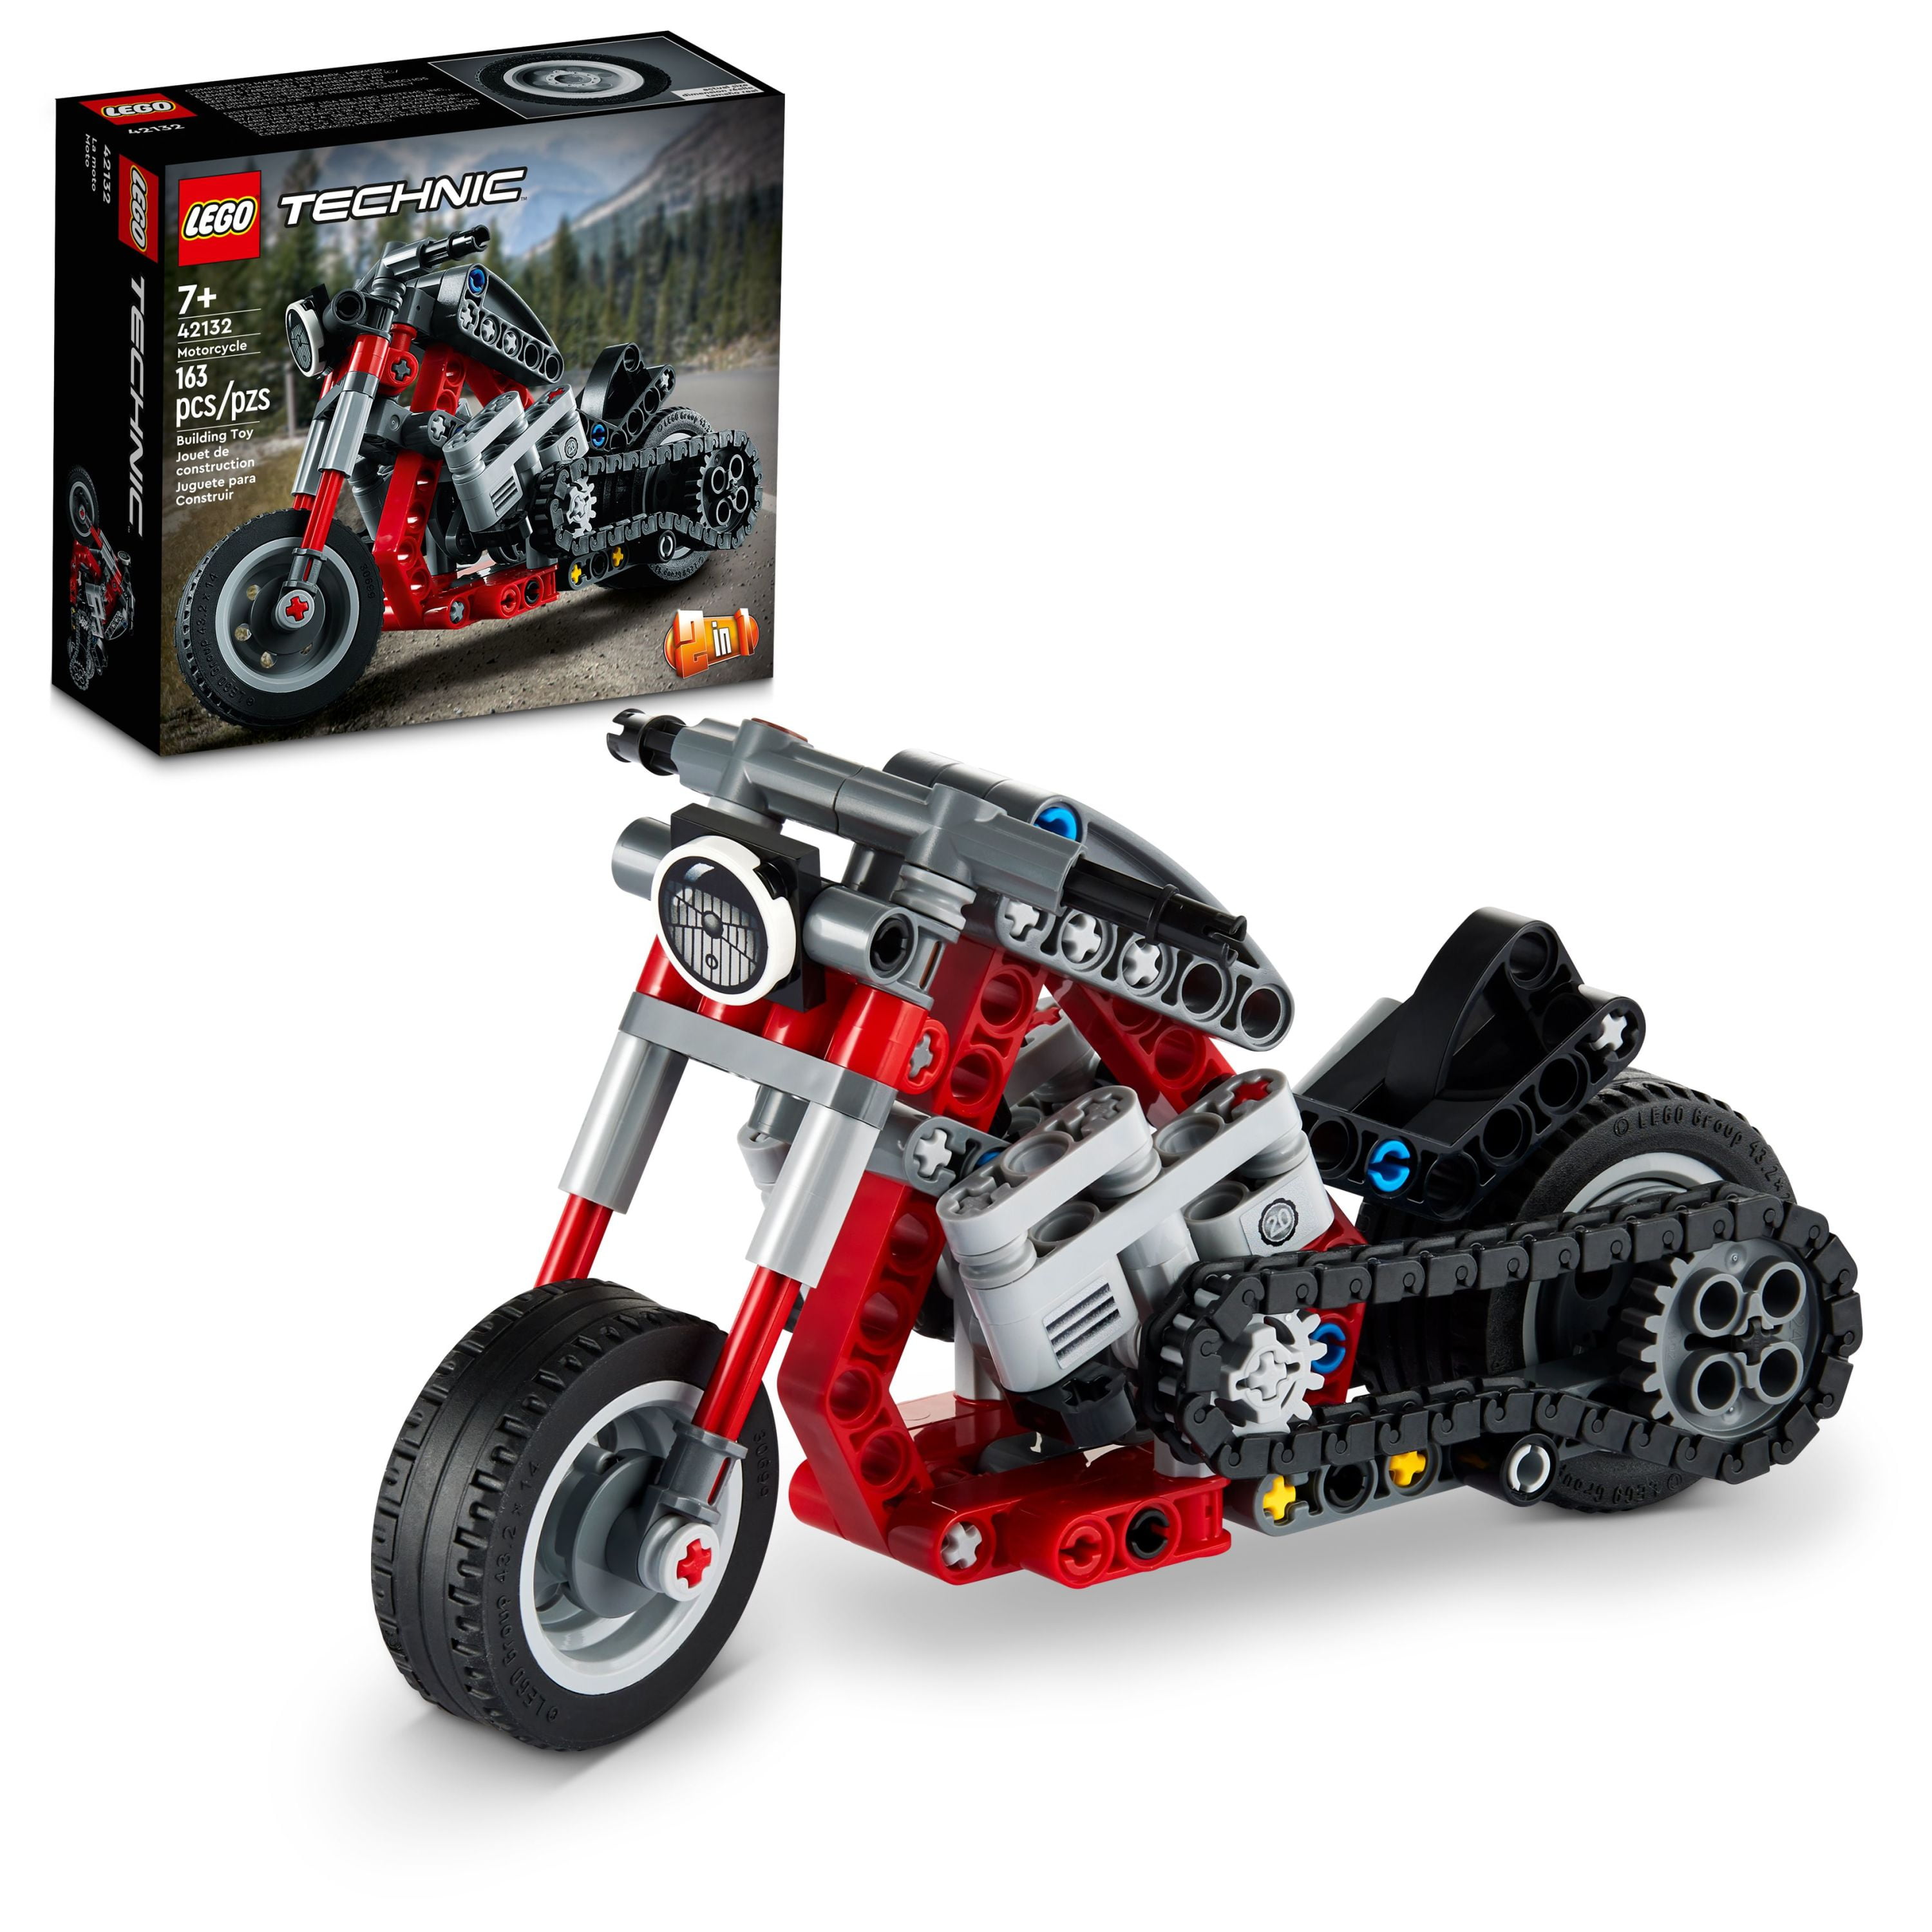 LEGO Technic Motorcycle to Adventure Bike 42132 2 in 1 Model Motorcycle Building Kit and Toy, Birthday Gift for Kids, Boys and Girls - Walmart.com